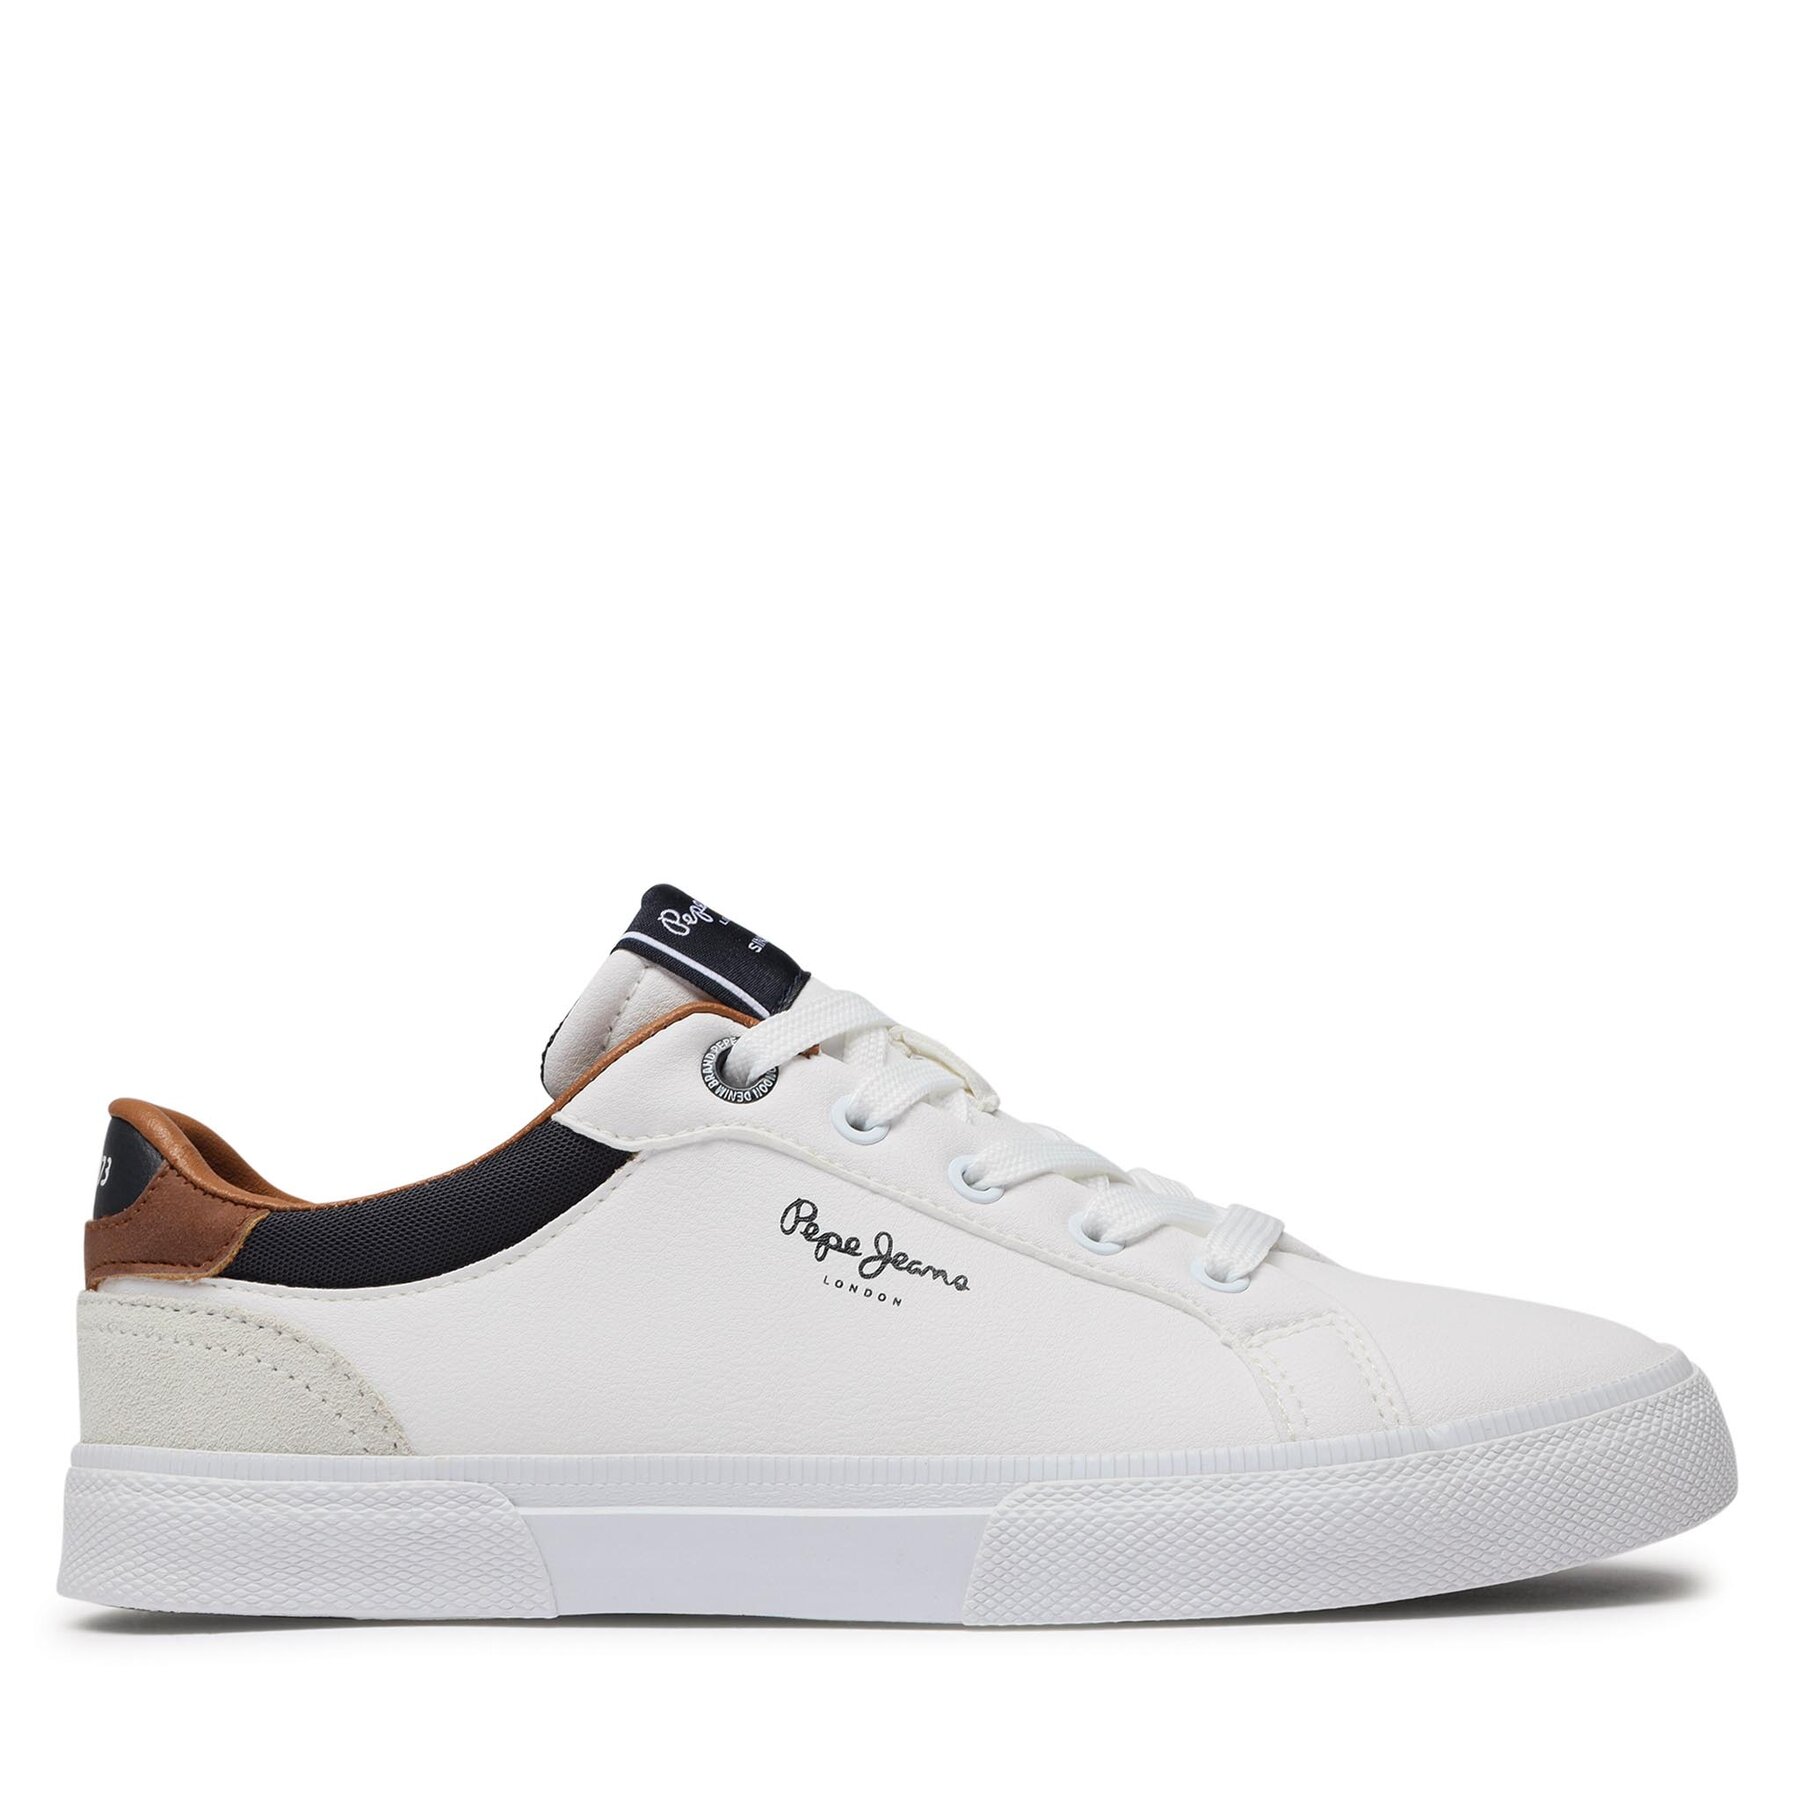 Sneakers aus Stoff Pepe Jeans PBS30569 White 800 von Pepe Jeans